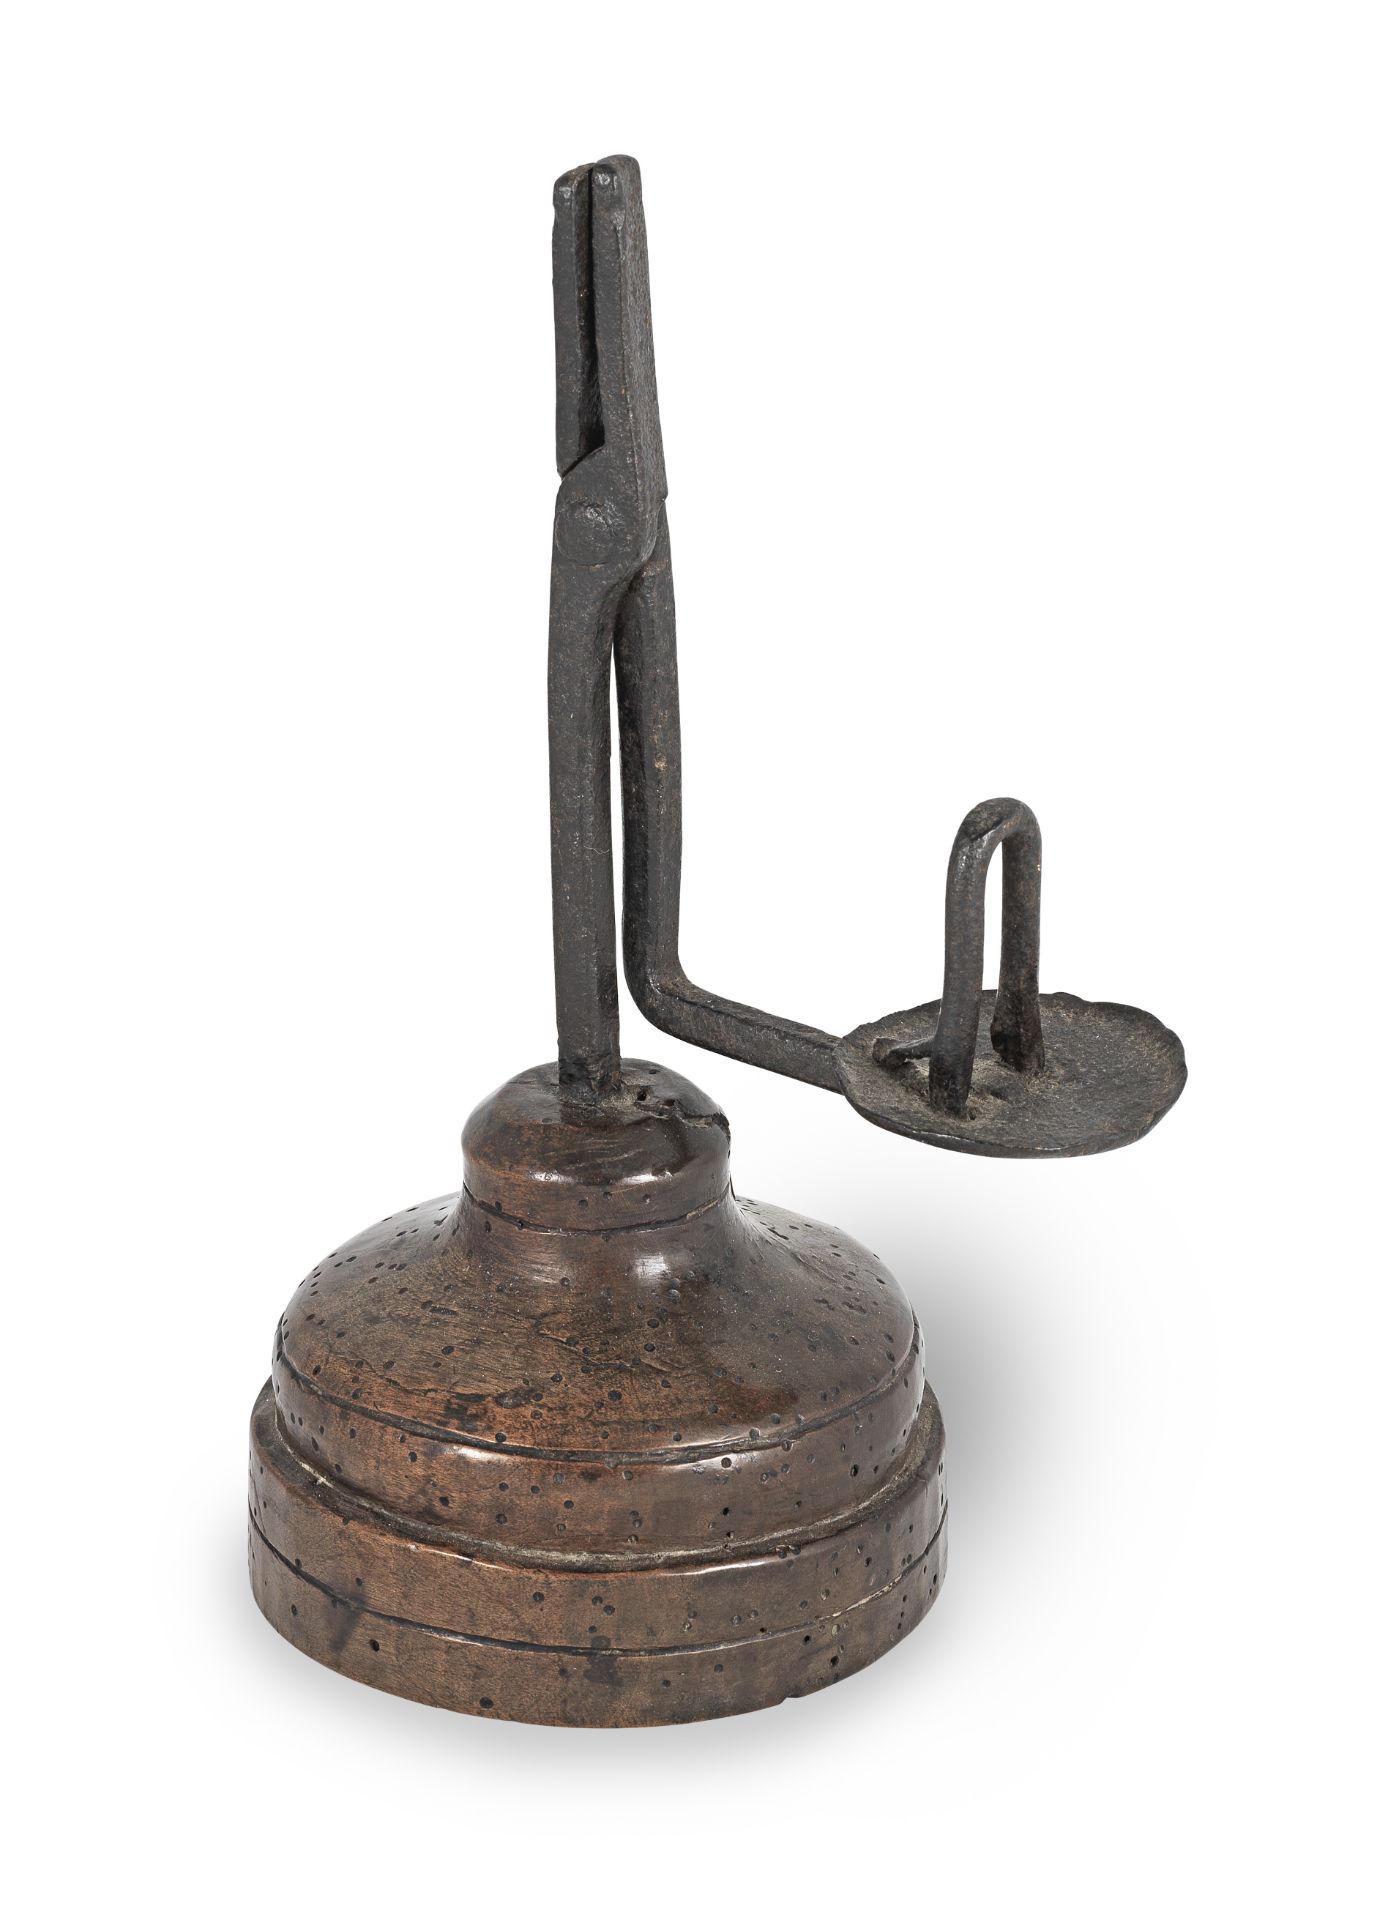 An unusual early to mid-19th century wrought iron and beech rushlight holder, English/Welsh